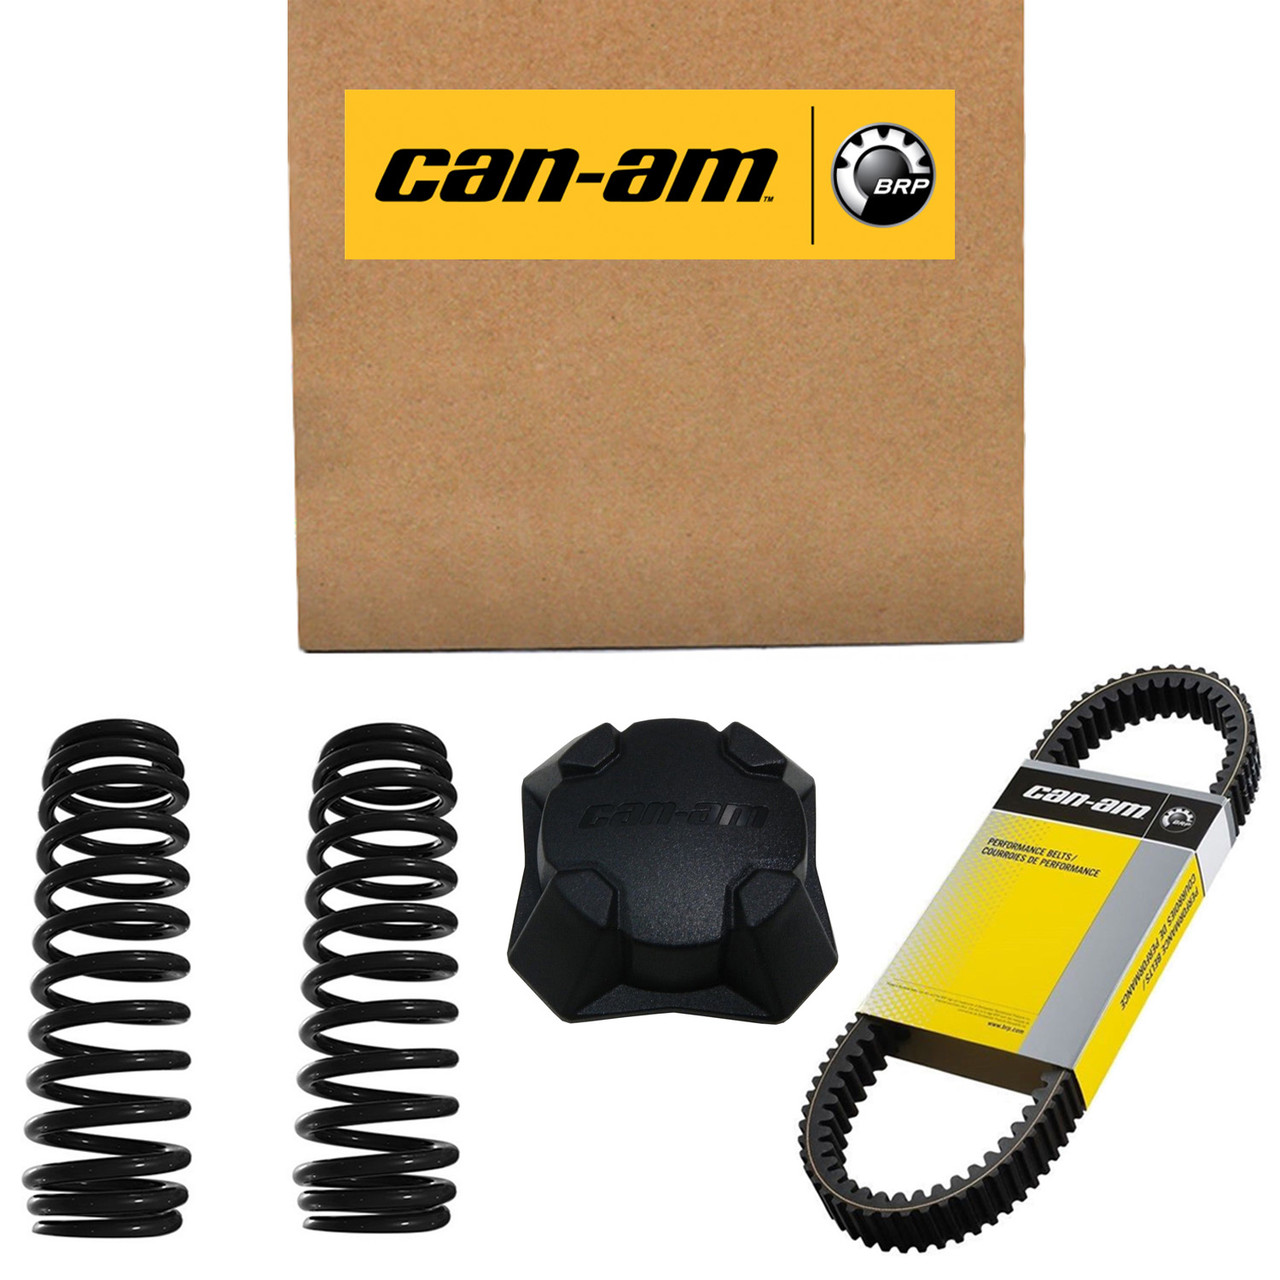 Can-Am New OEM Electronic Box, 420666687